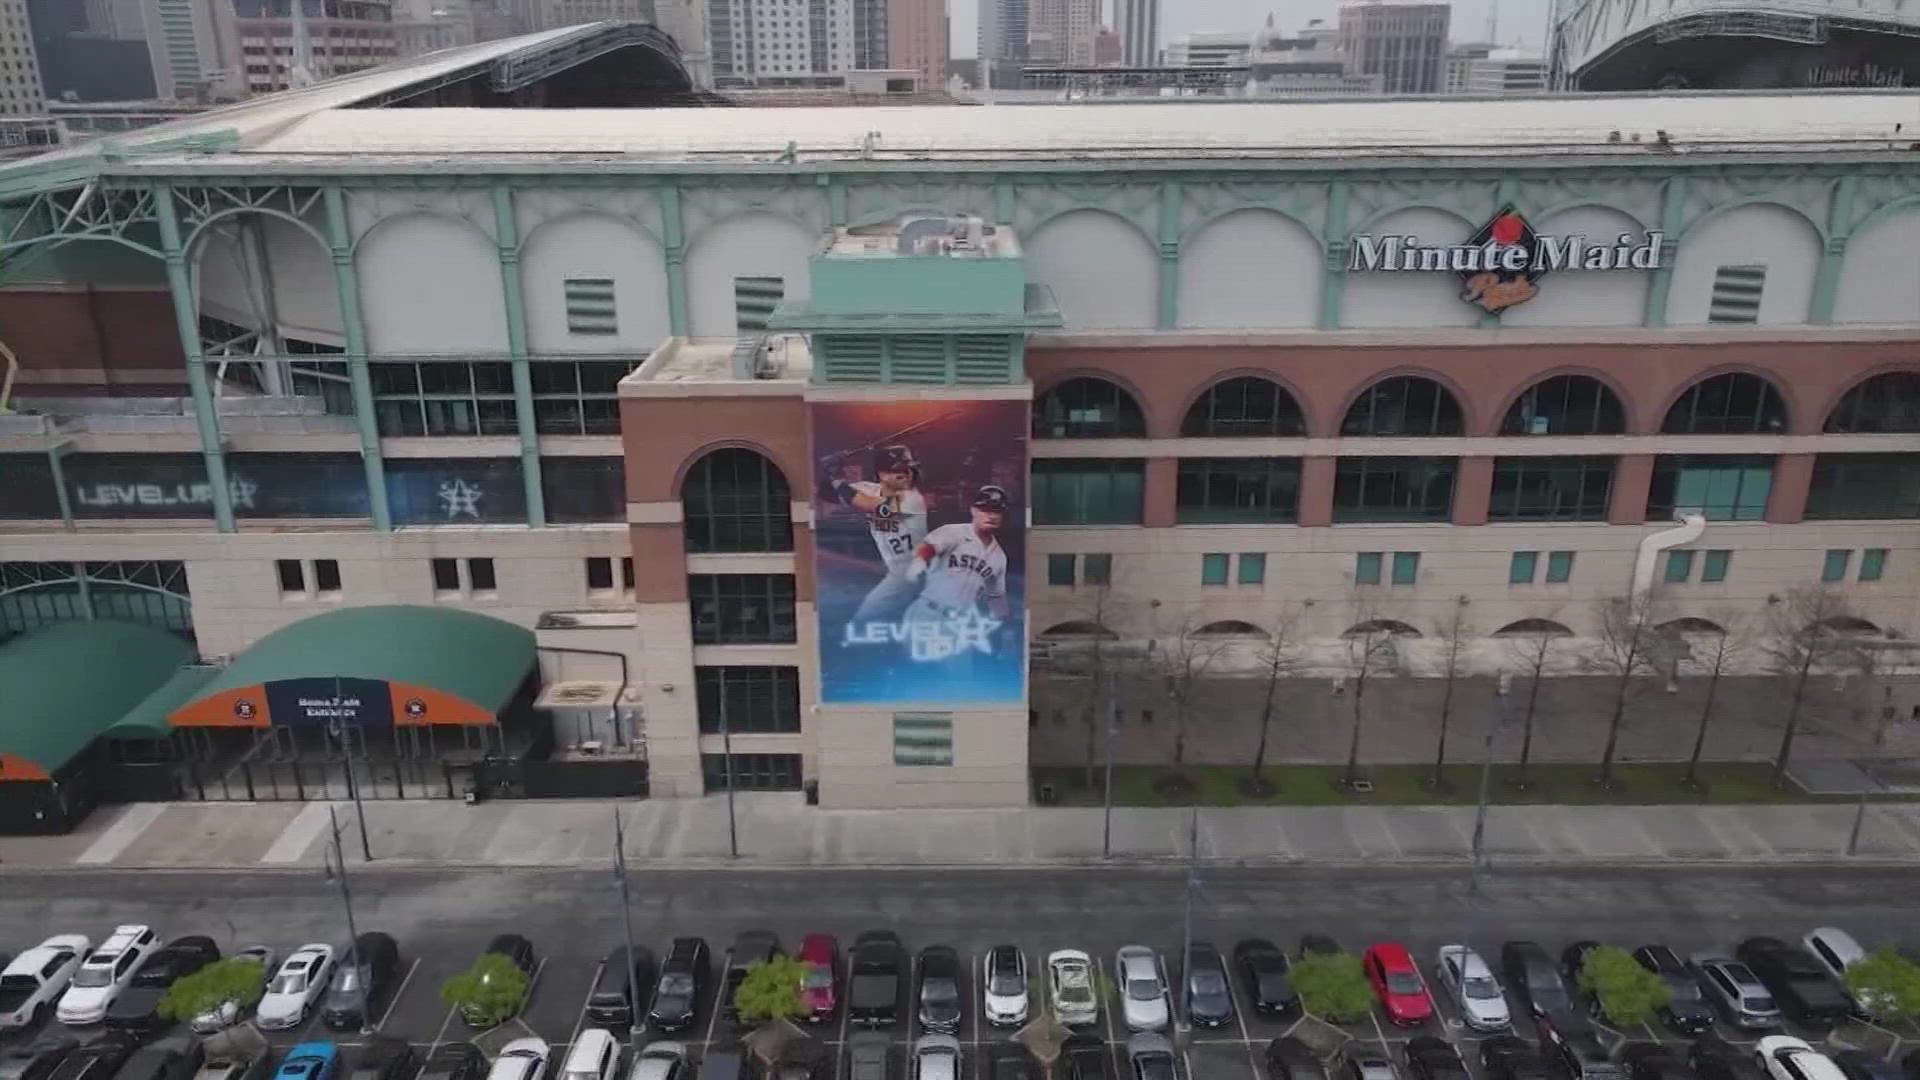 Will the roof be closed at Minute Maid Park during World Series